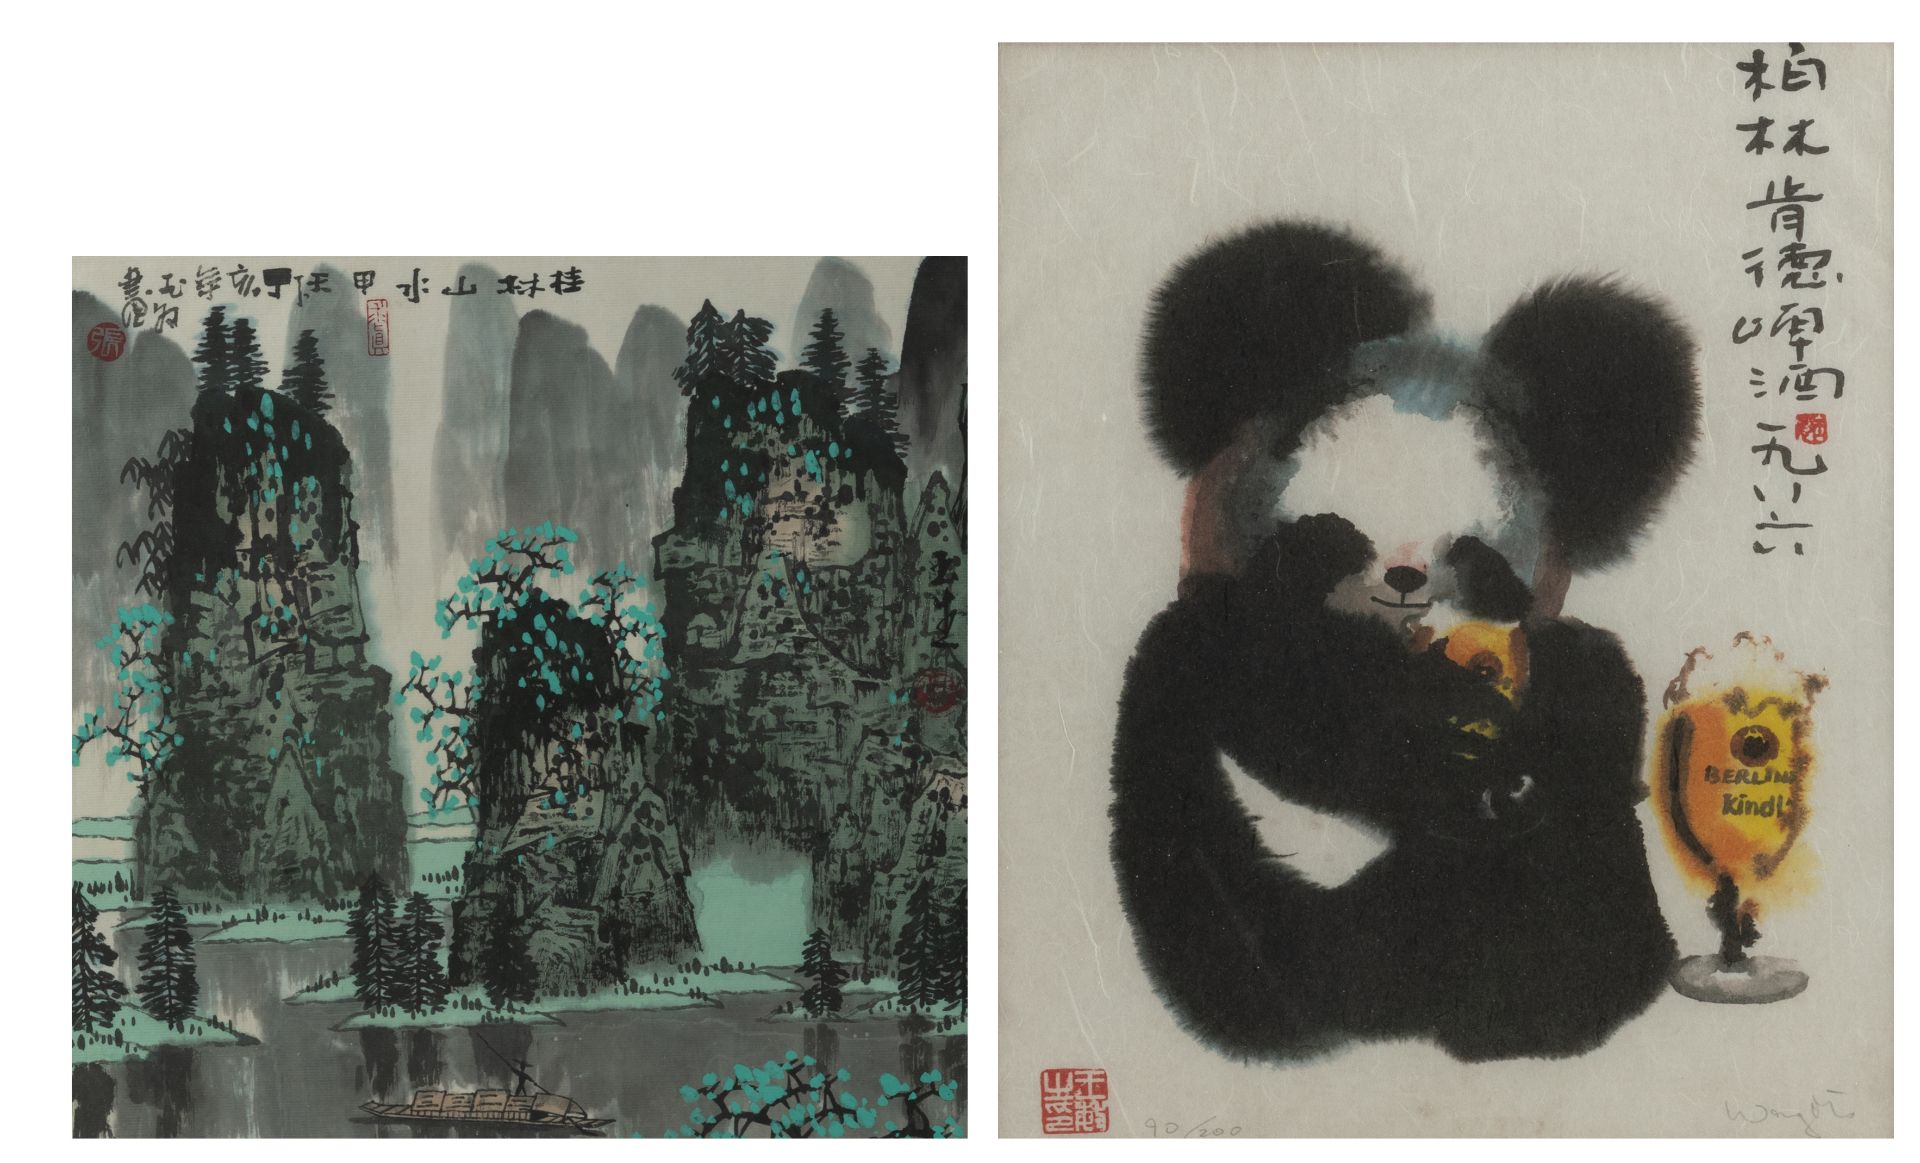 AN ALBUM LEAF WITH GUILIN LANDSCAPE PAINTING AND A POSTER WITH PANDA, BERLINER KINDL 1986